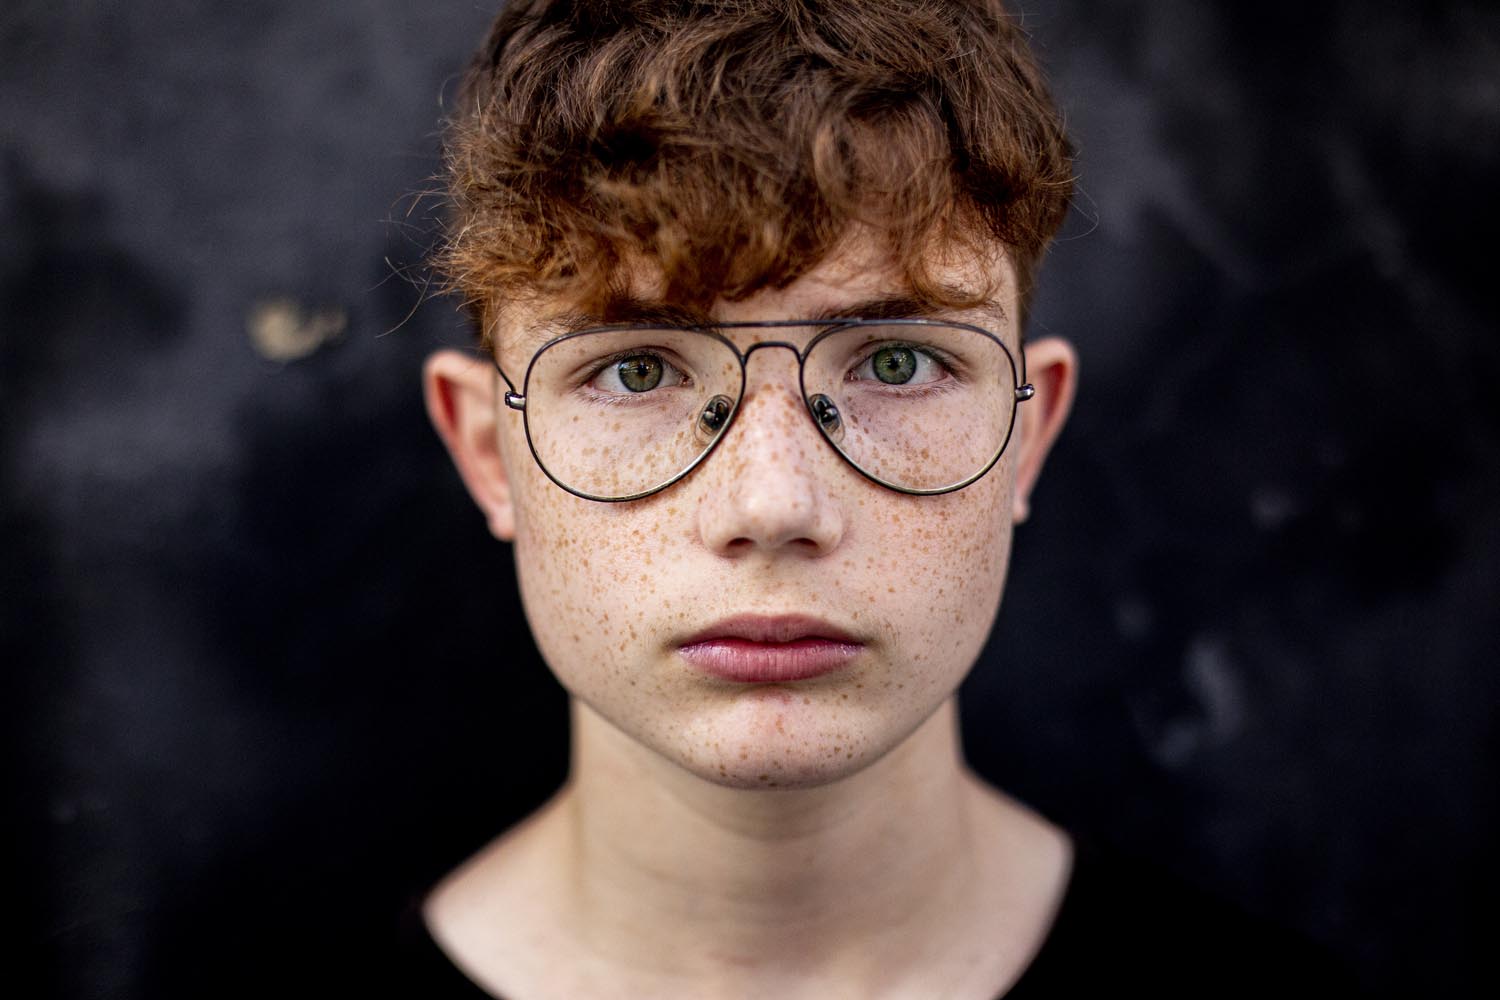 Portrait of red-haired teen boy with freckles and eyeglasses